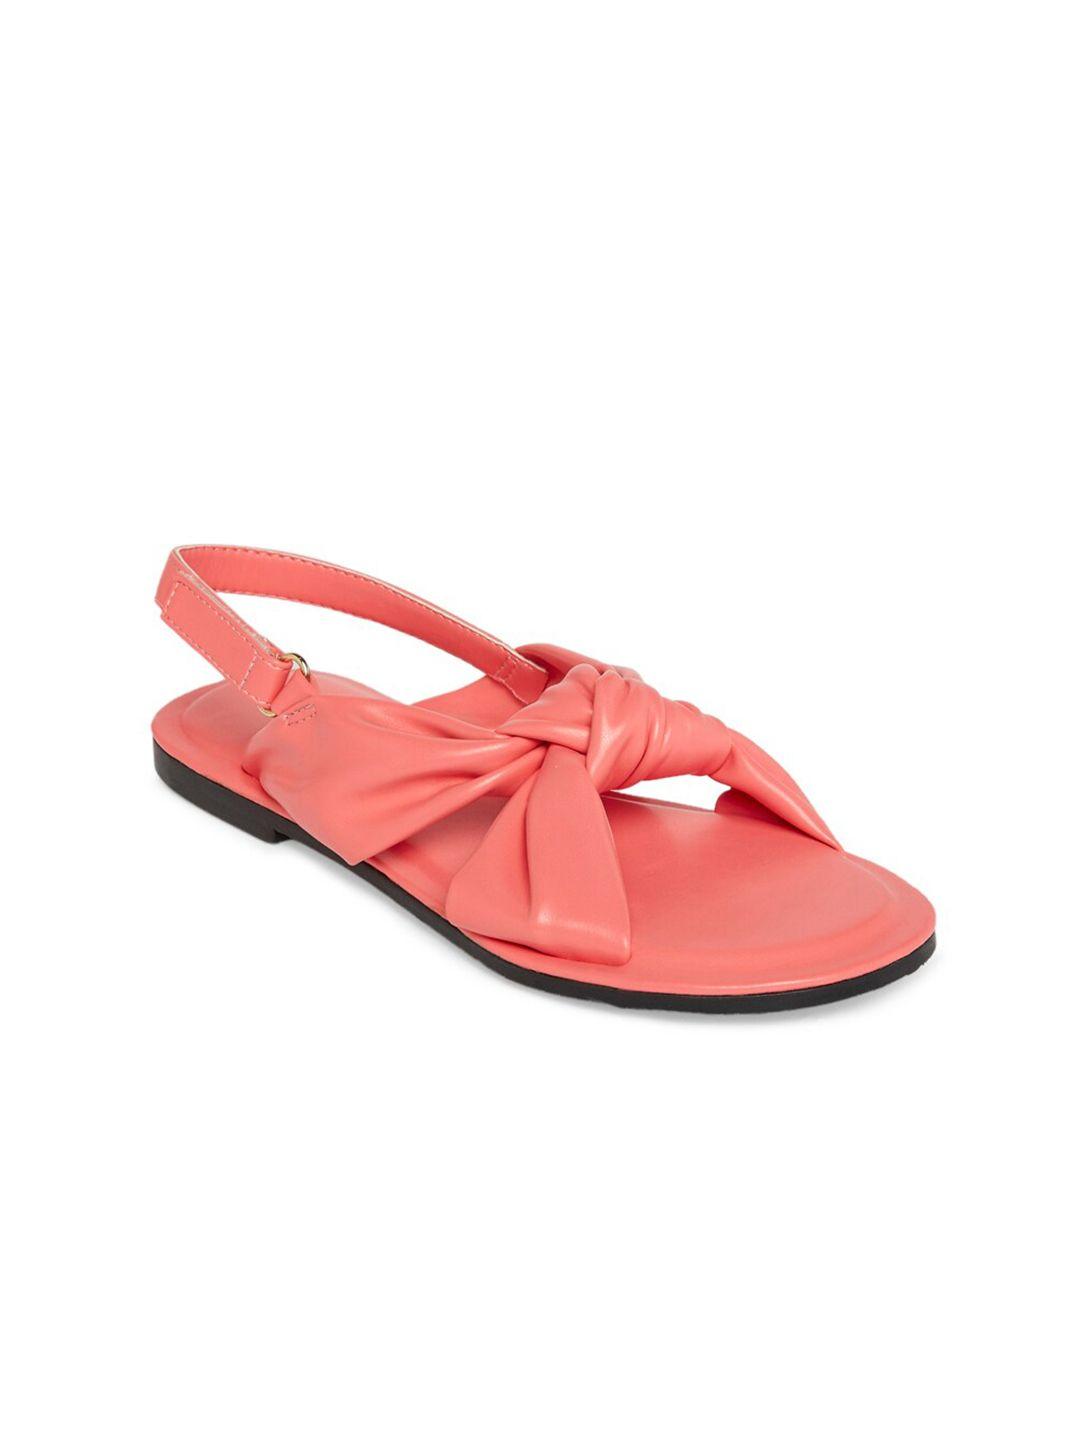 pantaloons junior girls coral open toe flats with bows